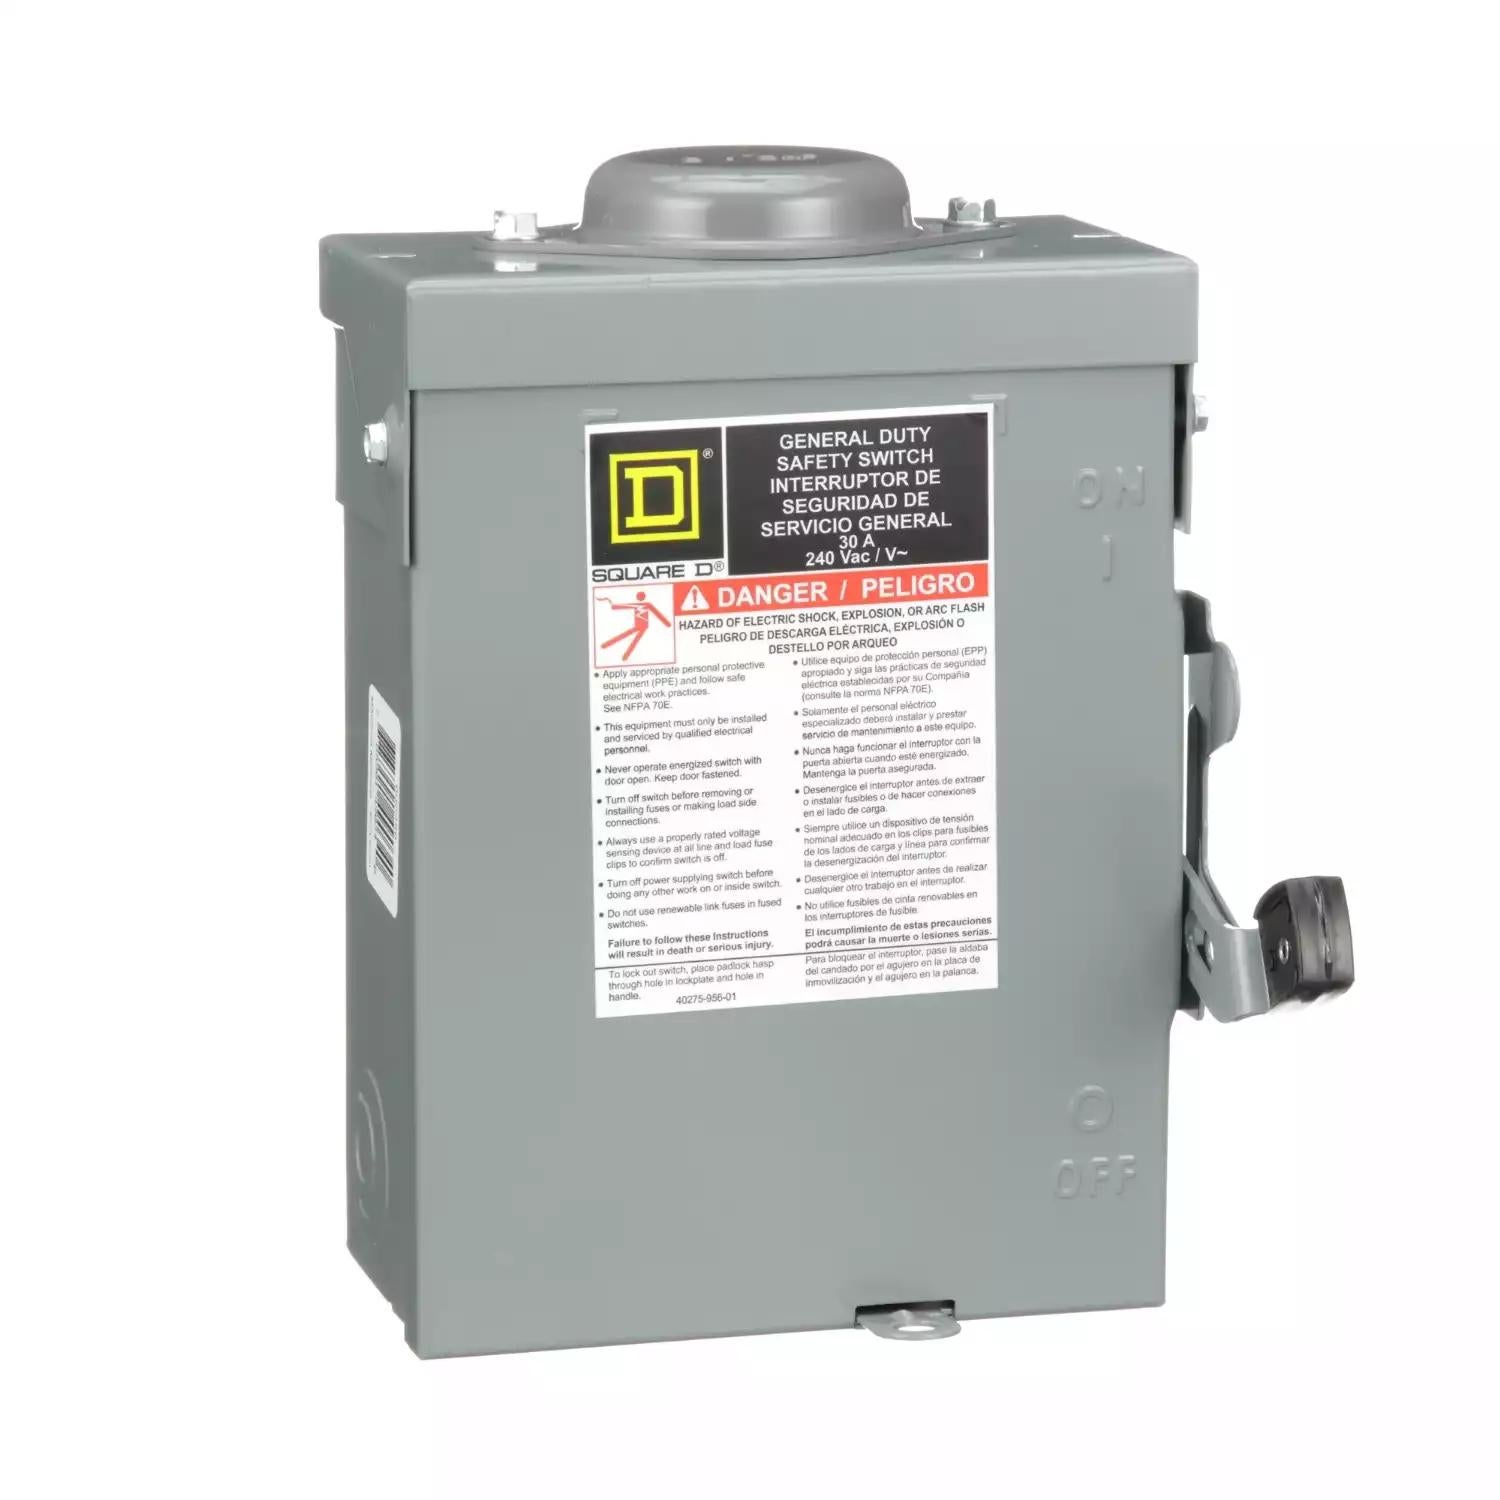 Safety switch, general duty, non fusible, 30A, 2 poles, 3 hp, 240 VAC, NEMA 3R, bolt-on provision